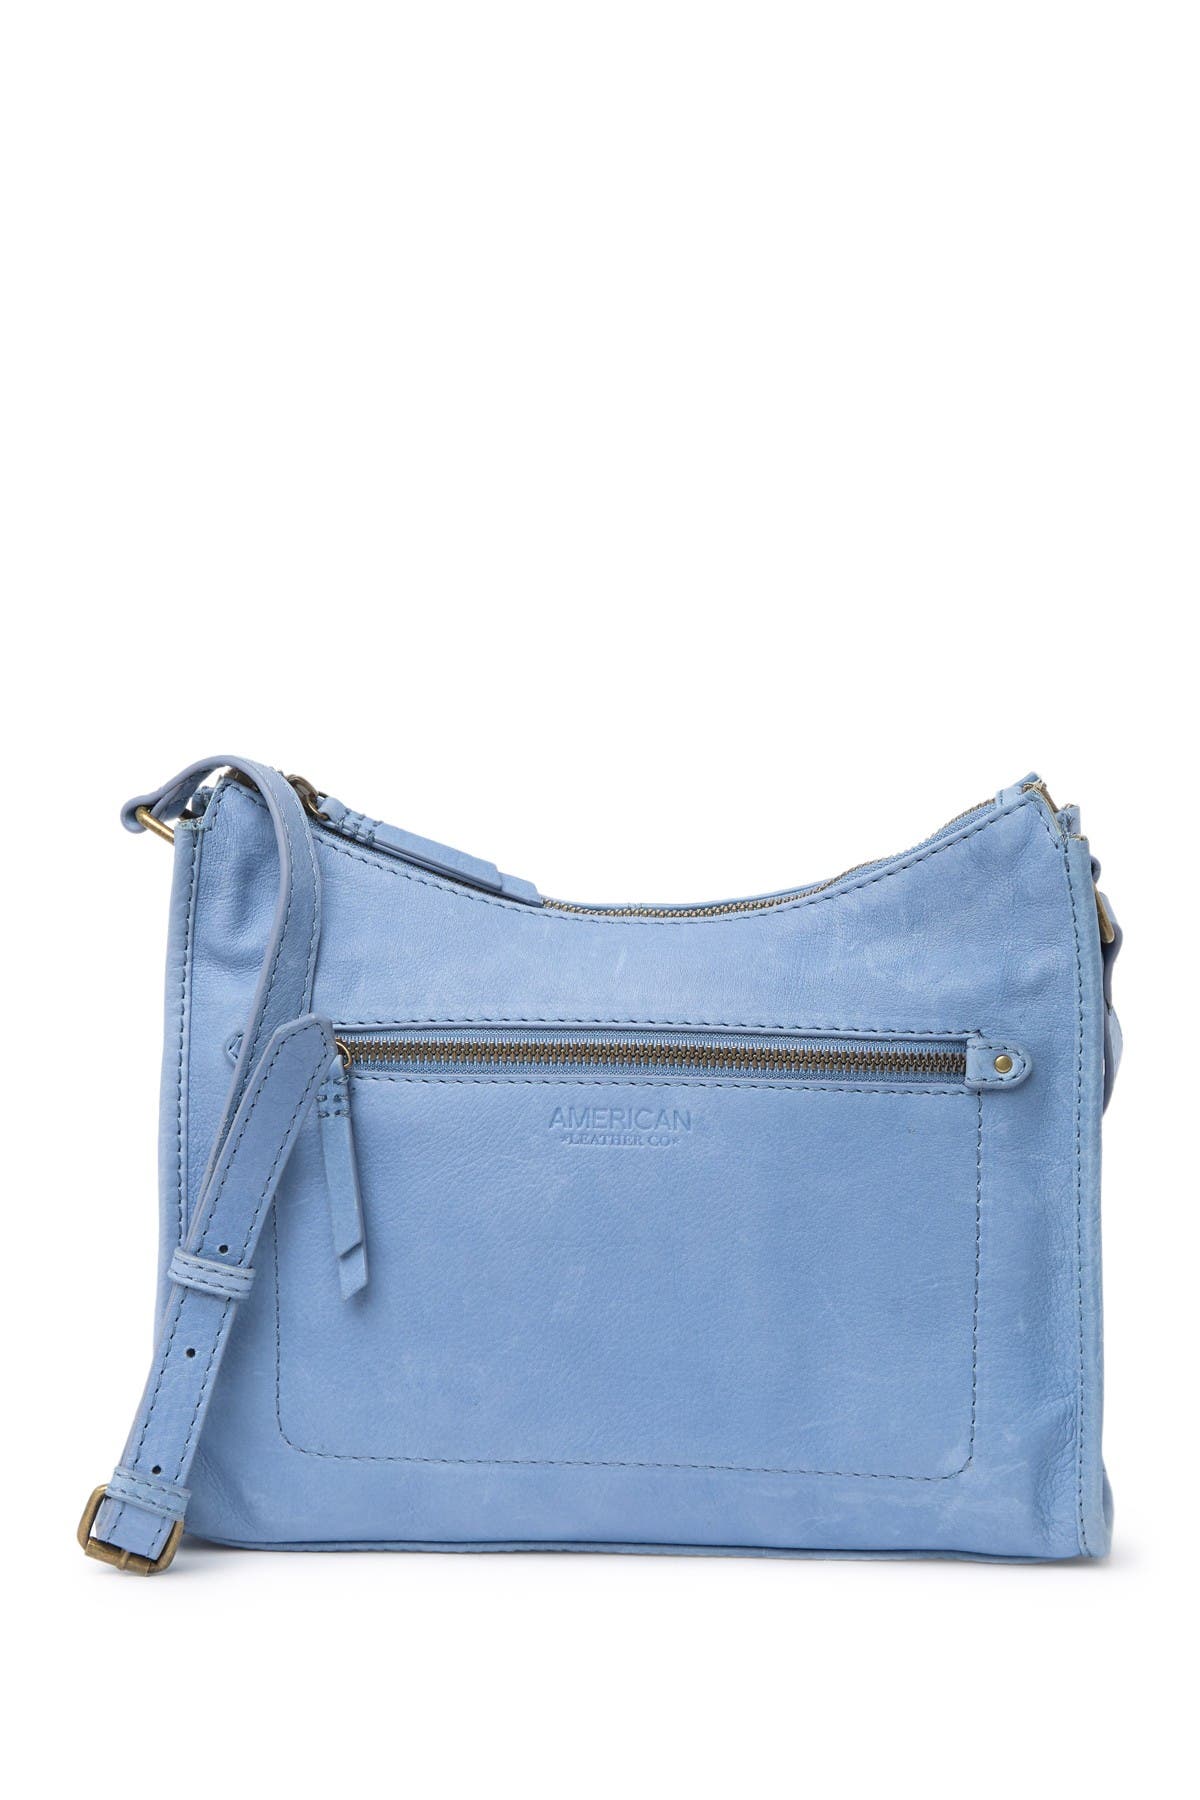 American Leather Co. Chadron Smooth Leather Crossbody In Glacier Blue Smooth